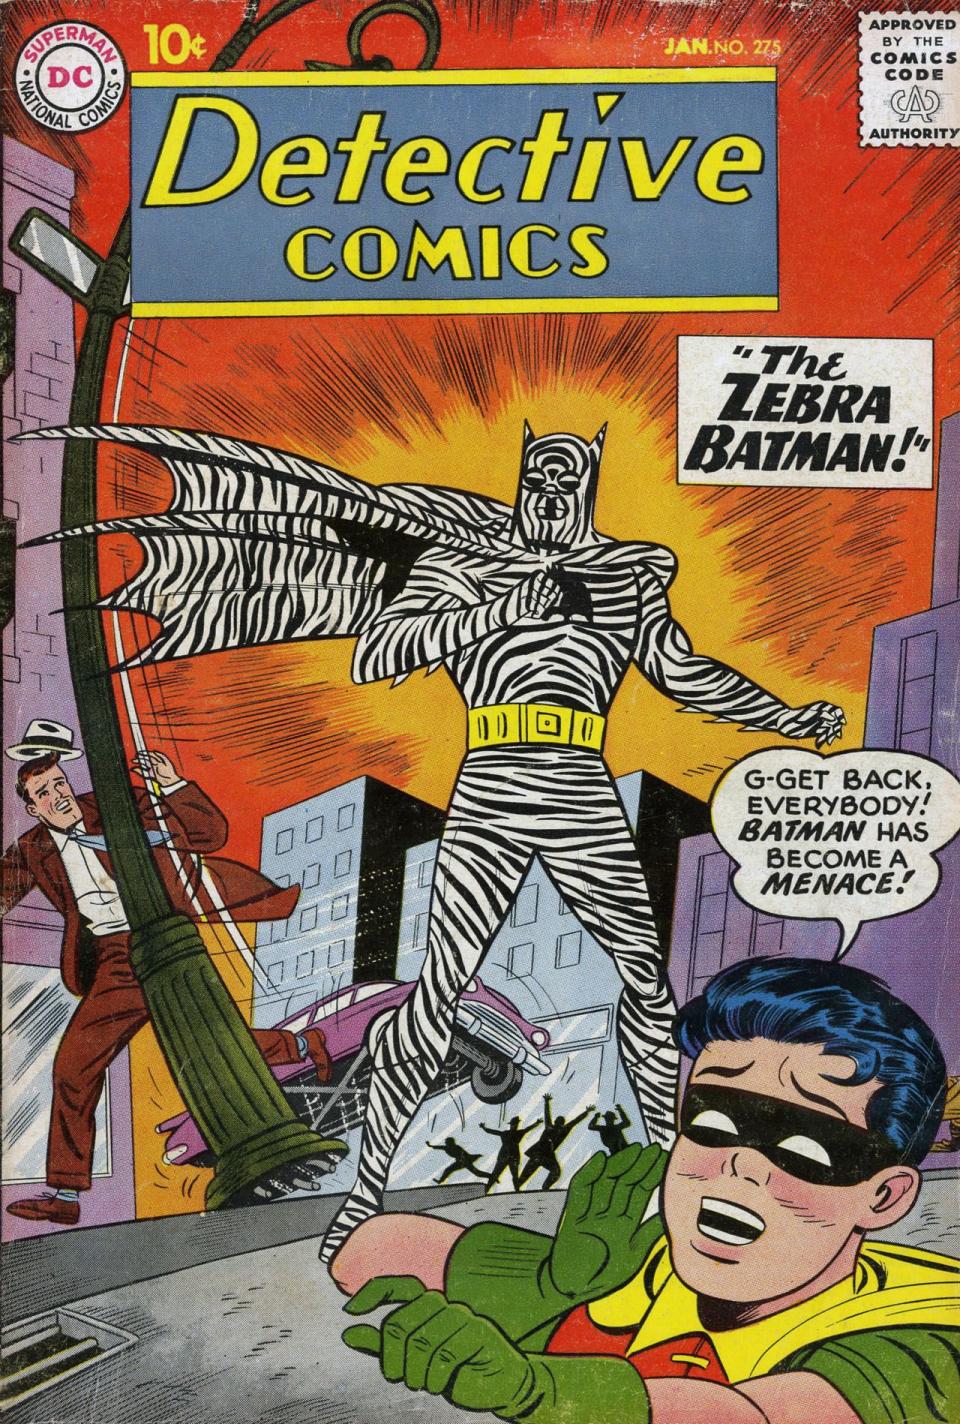 80 BATMAN Covers That Are Hilariously Weird_40